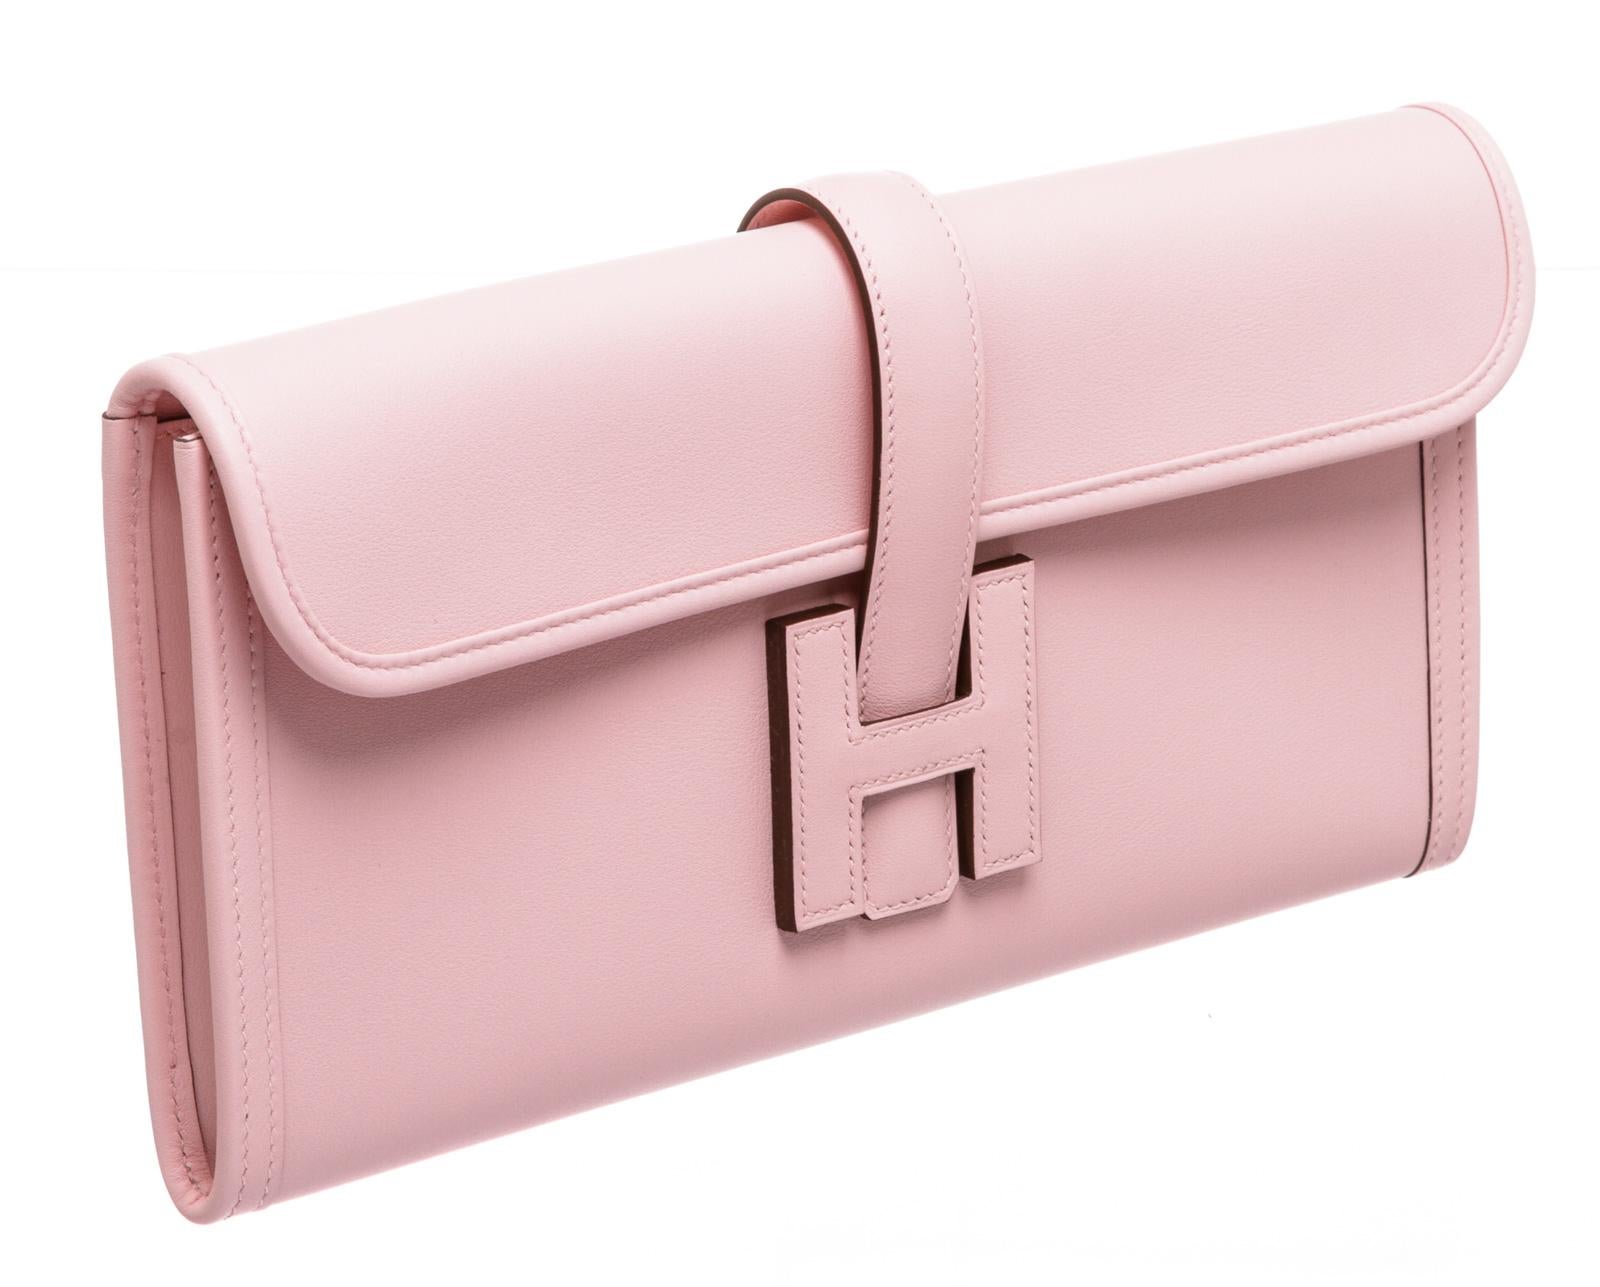 100% Authentic

This gorgeous Hermes Jige clutch is the most elegant way to organize your essentials like your bills, currency, credit cards and is great for nights out on the town. The clutch features gorgeous swift leather in Rose Sakura with a